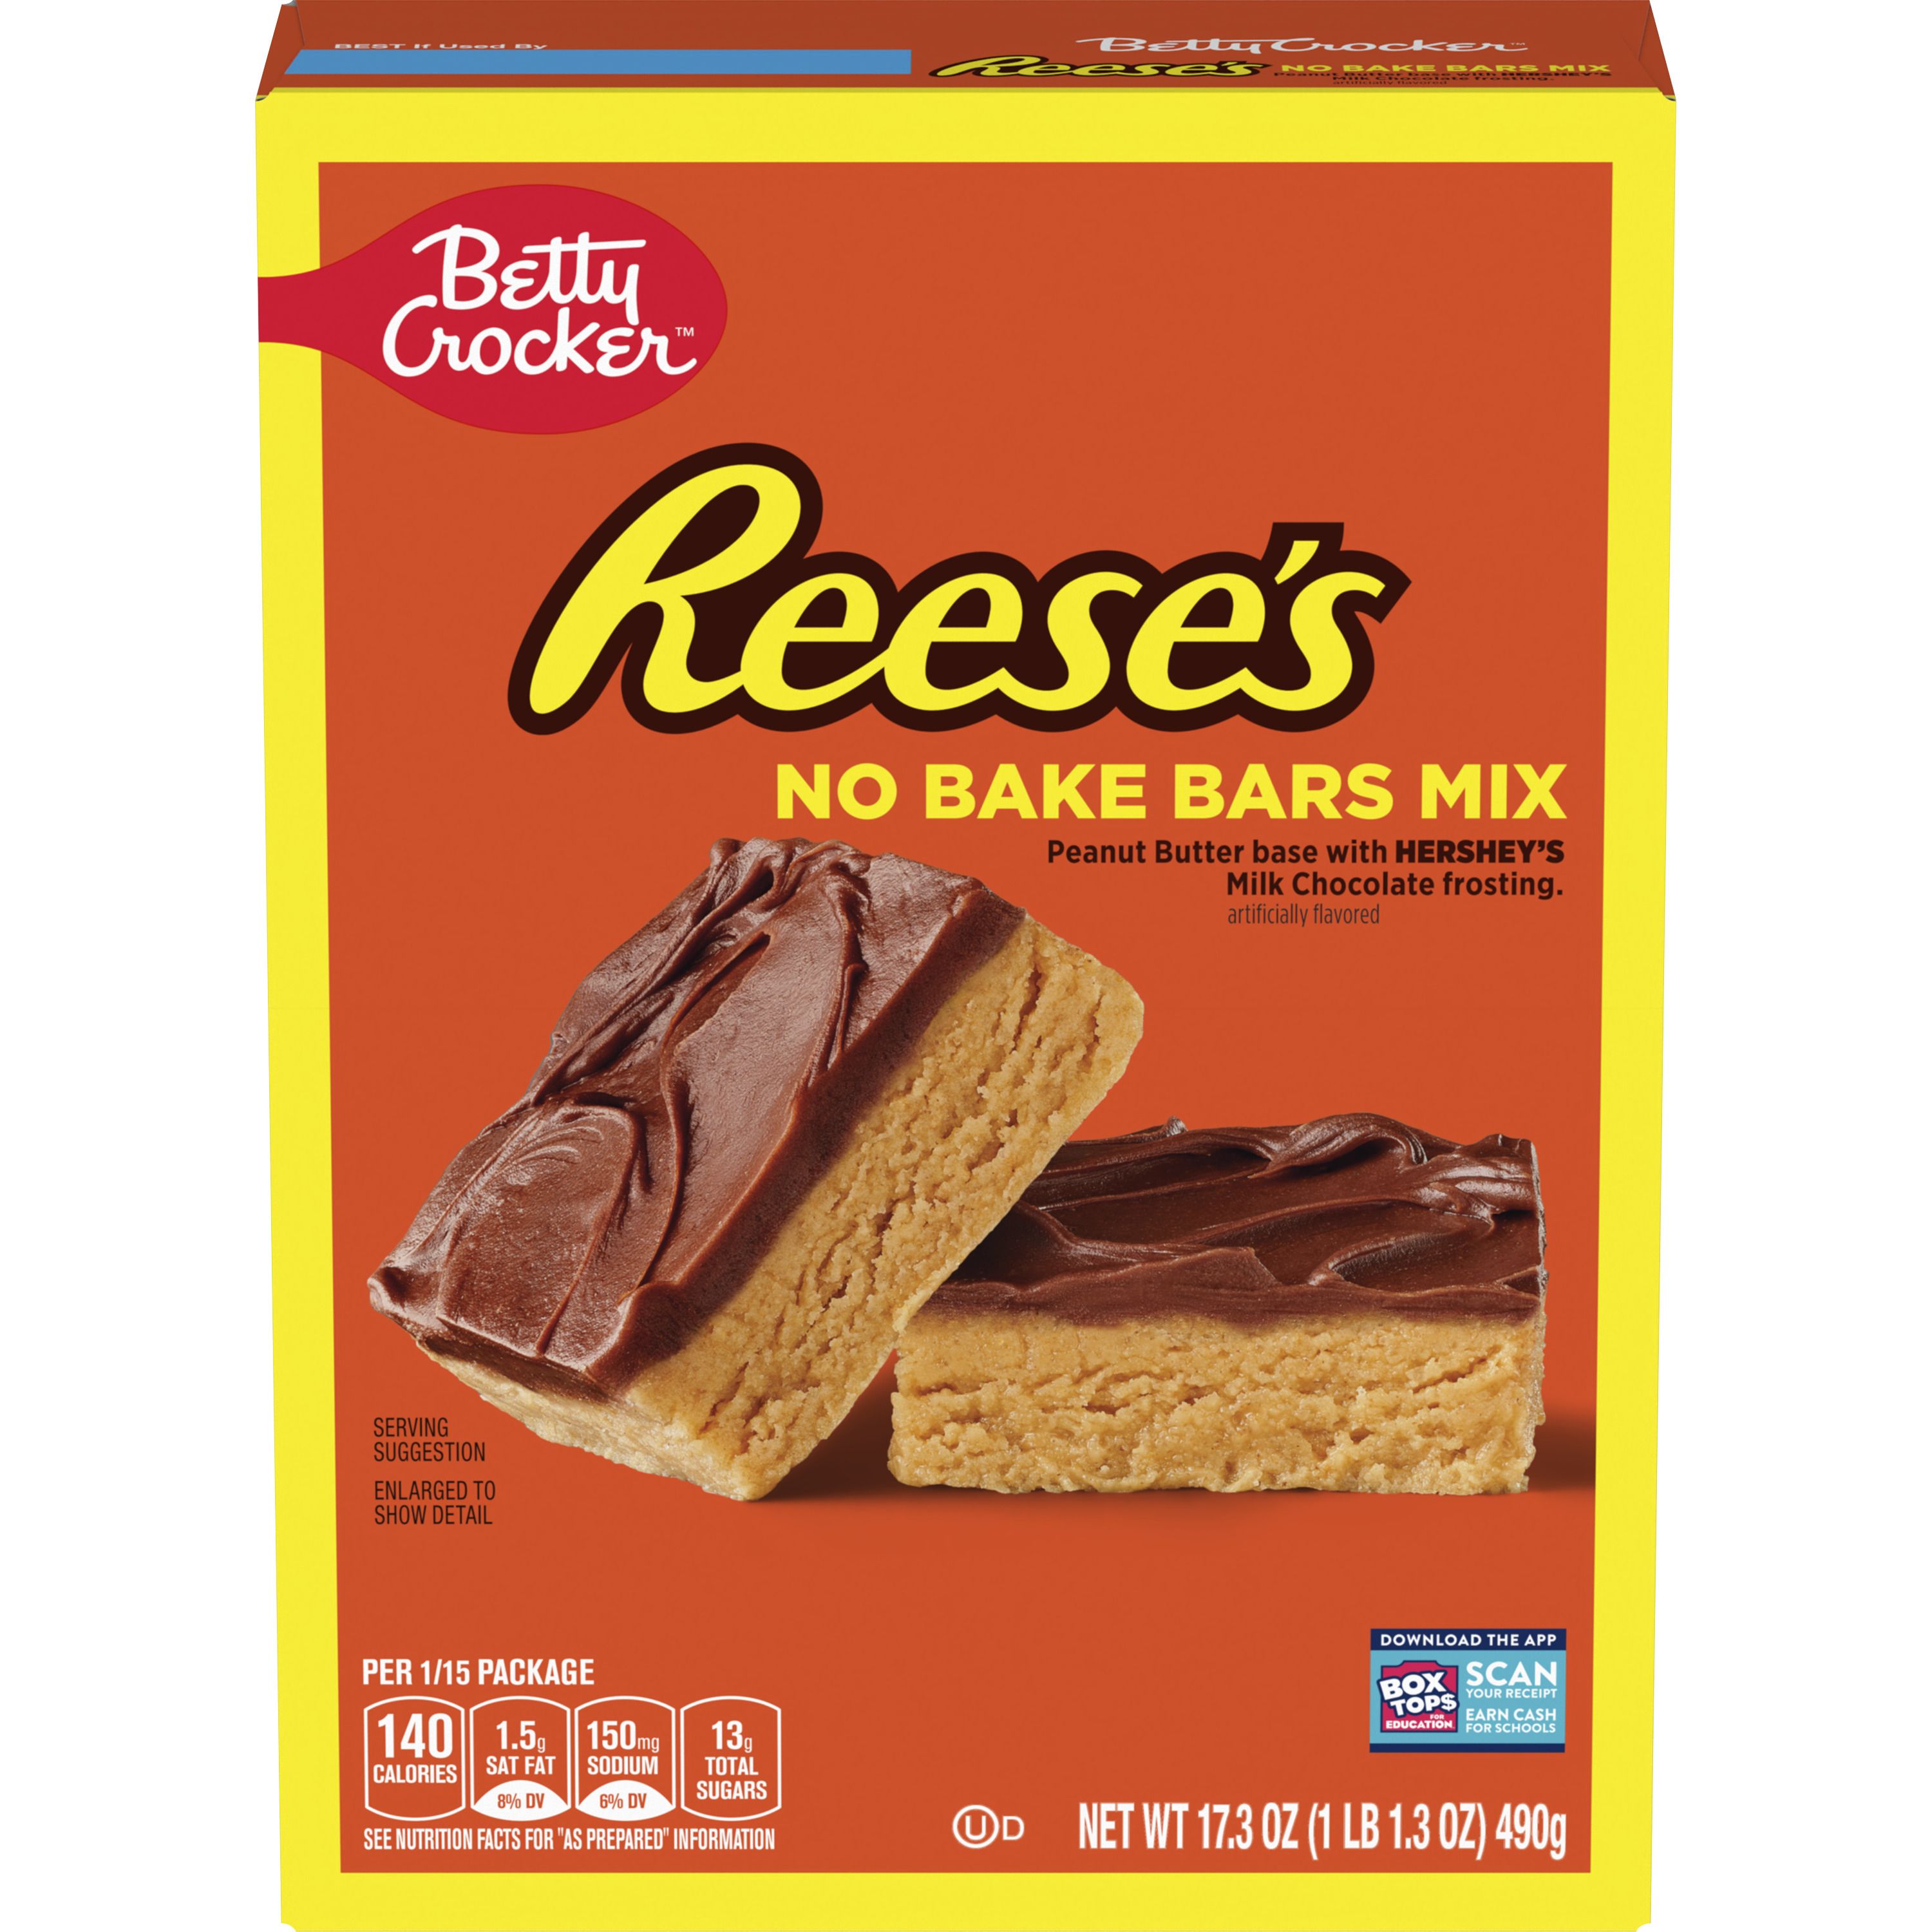 Betty Crocker REESE'S Peanut Butter No Bake Bars Mix With HERSHEY’S Milk Chocolate Frosting, 17.3 oz - Front